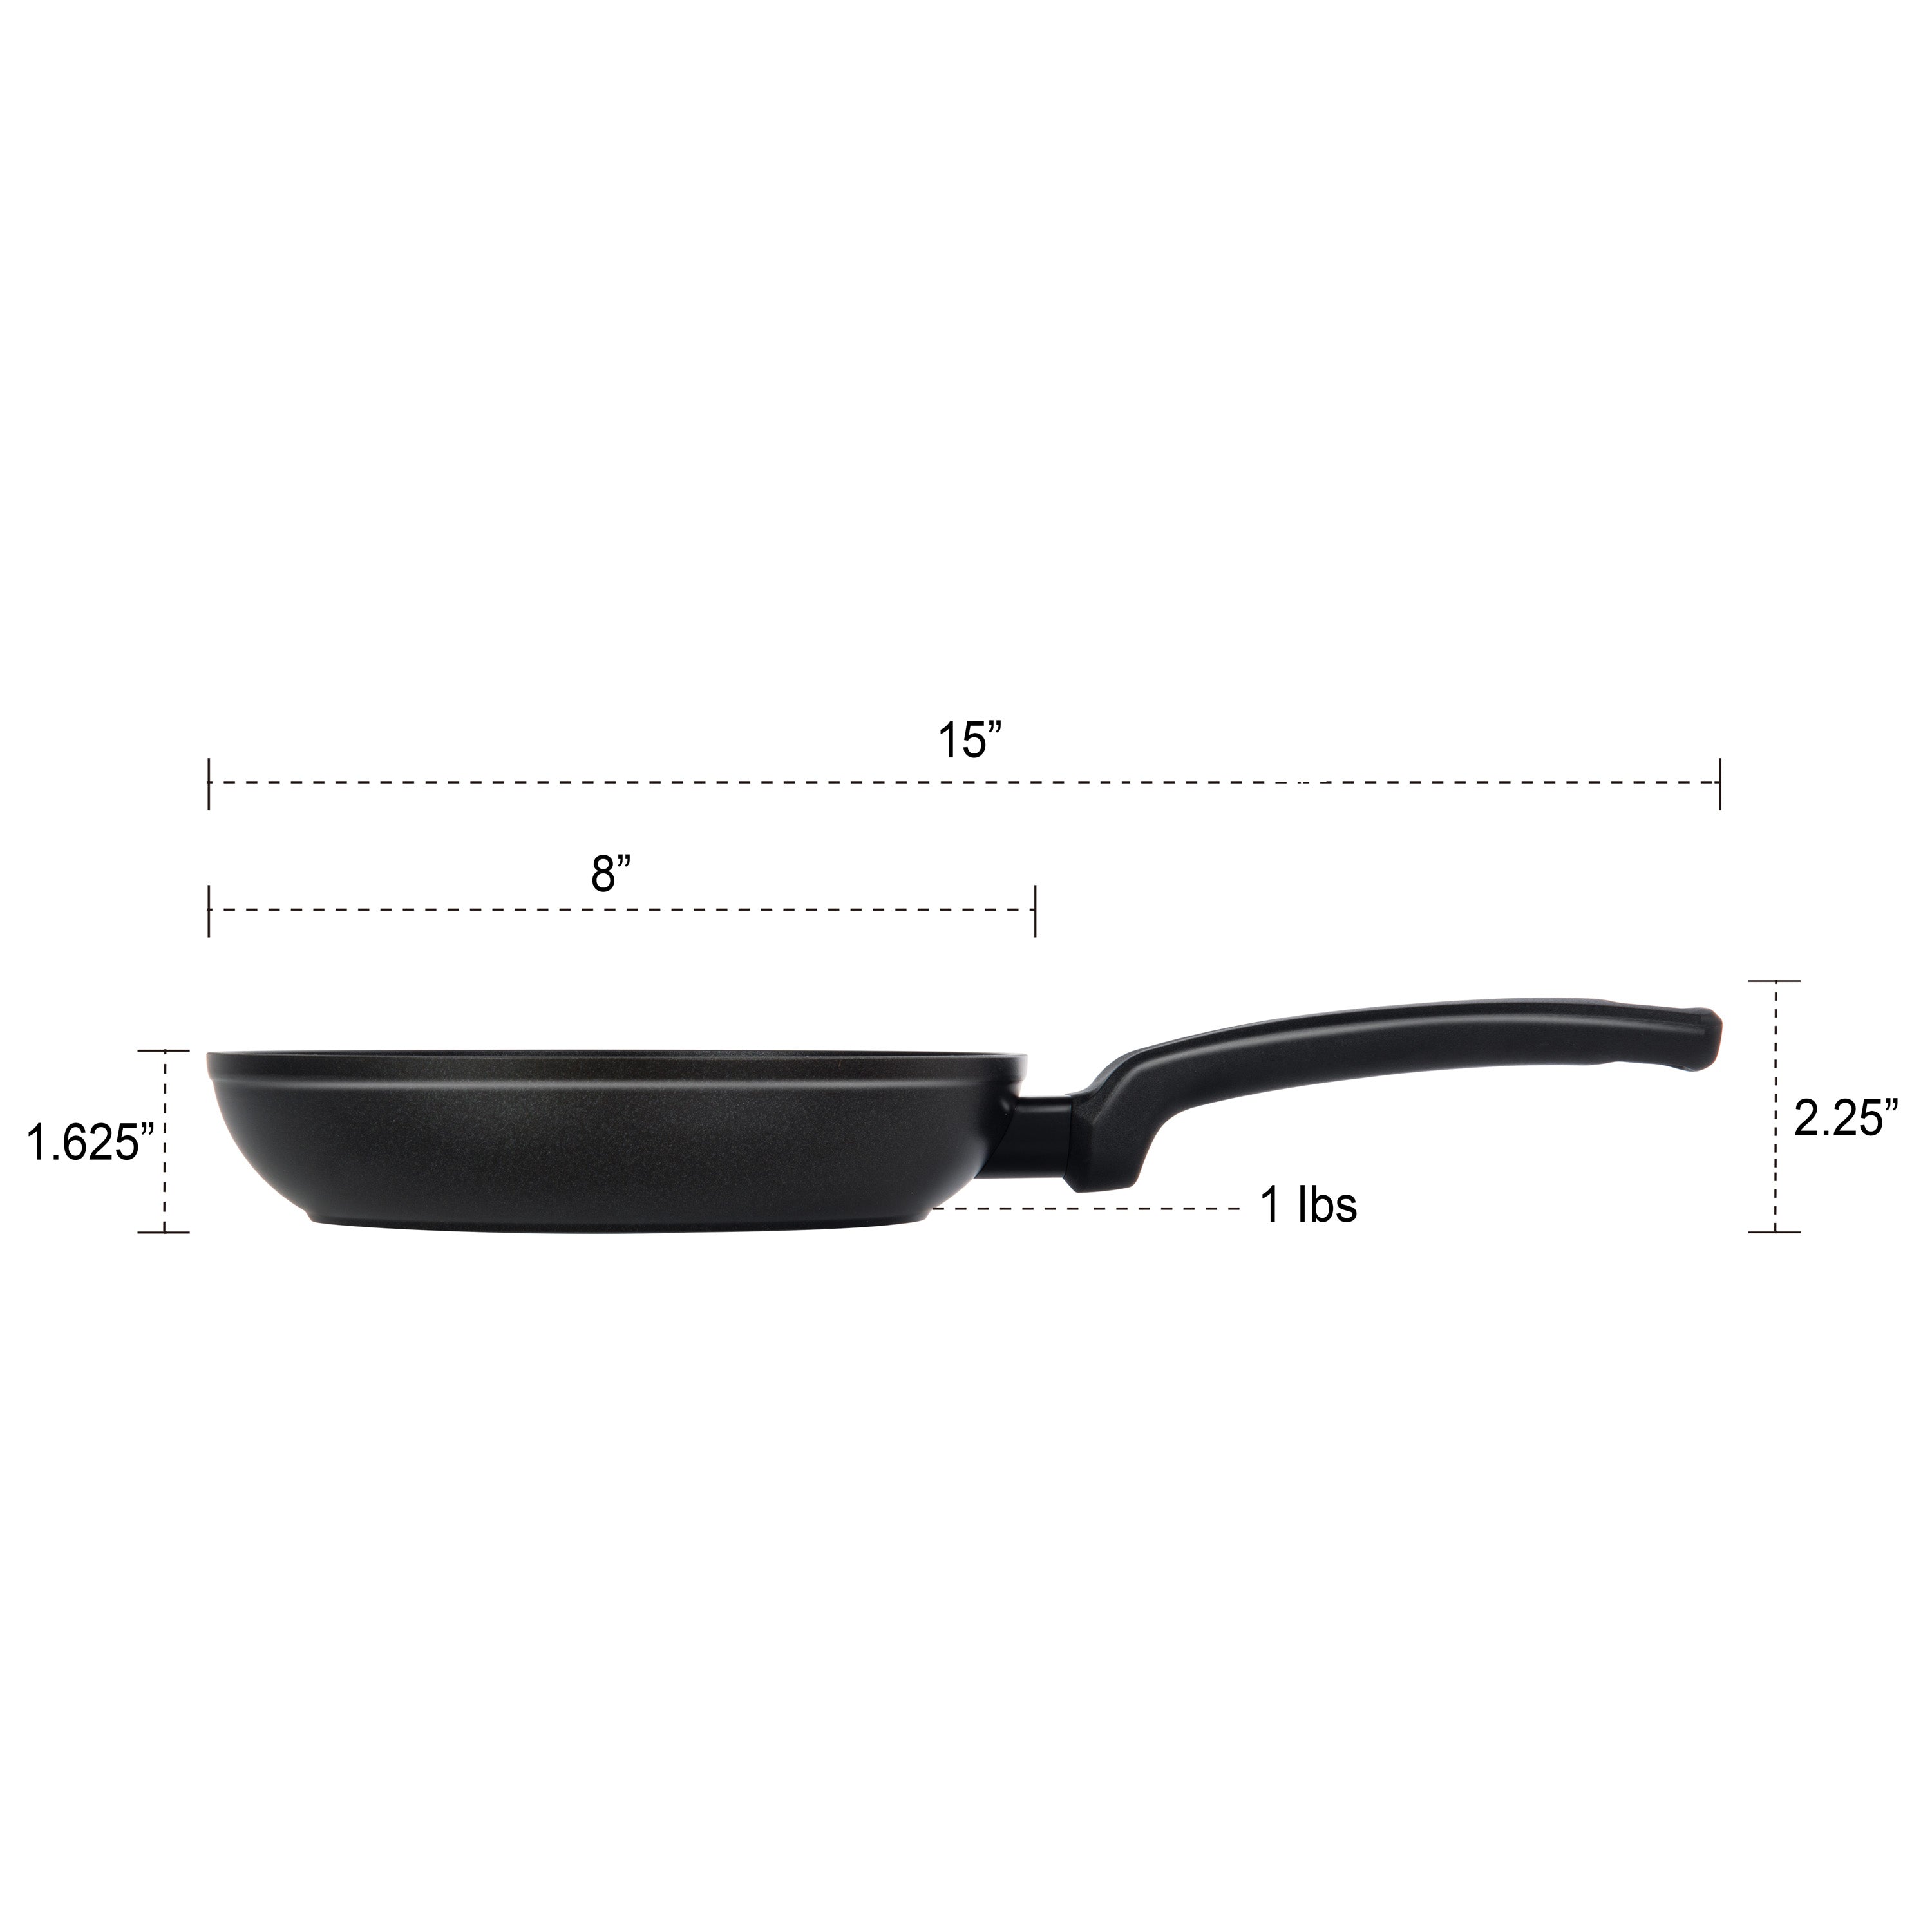 Master Pan 3-Section Non-Stick Skillet – A Full Meal In 1 Pan